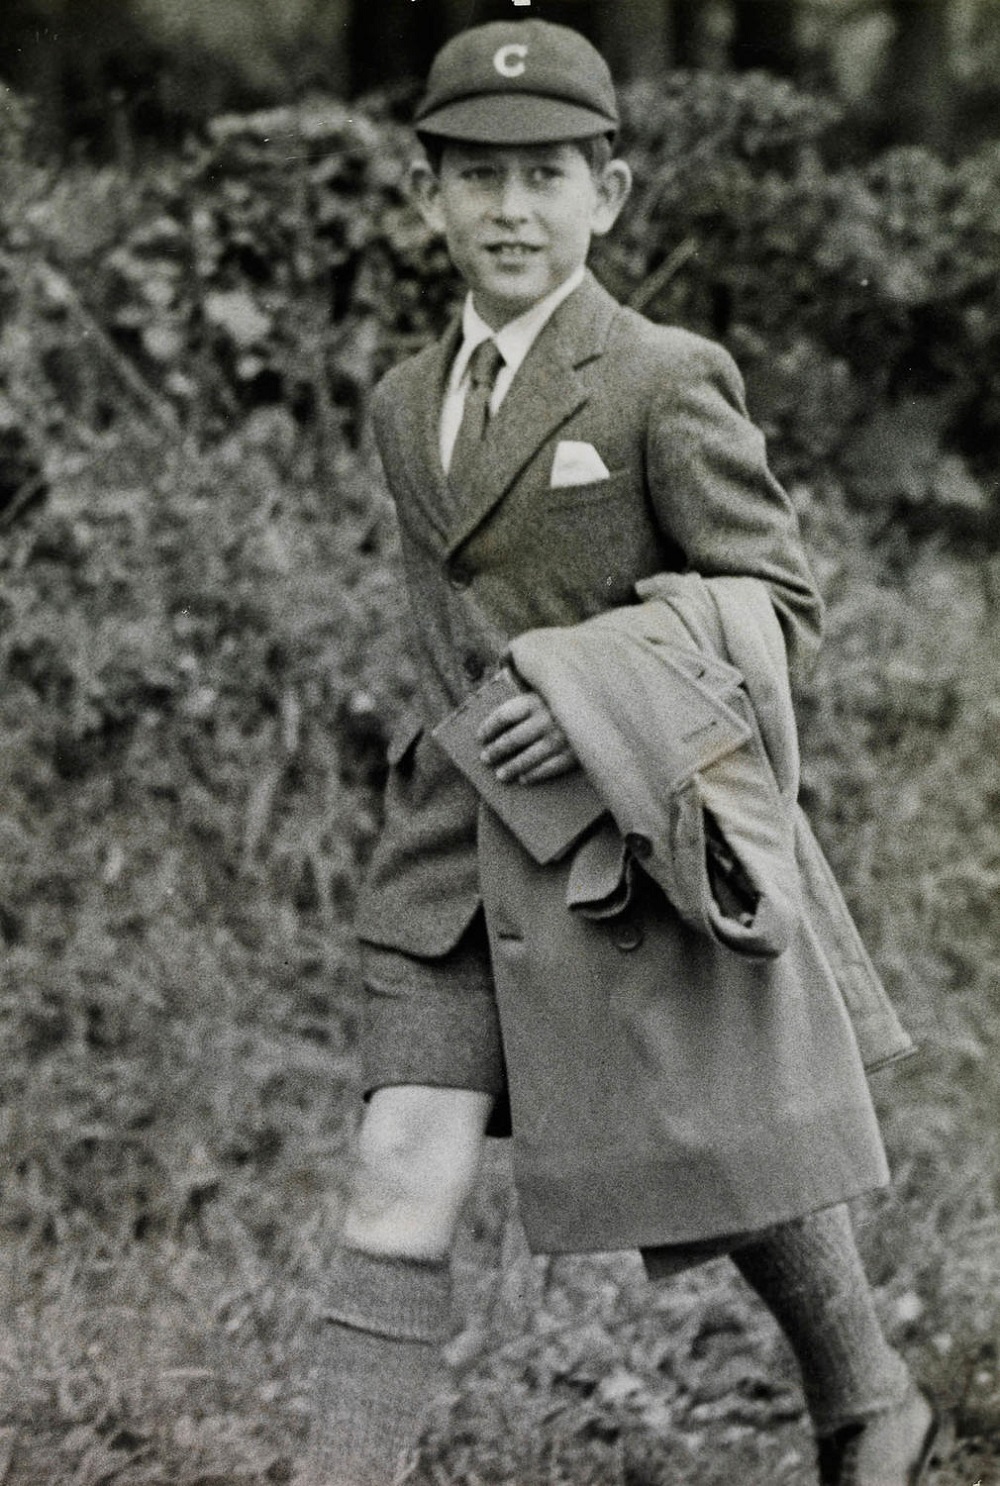 Photograph of a young Prince Charles (now King Charles III) in a school uniform in 1958